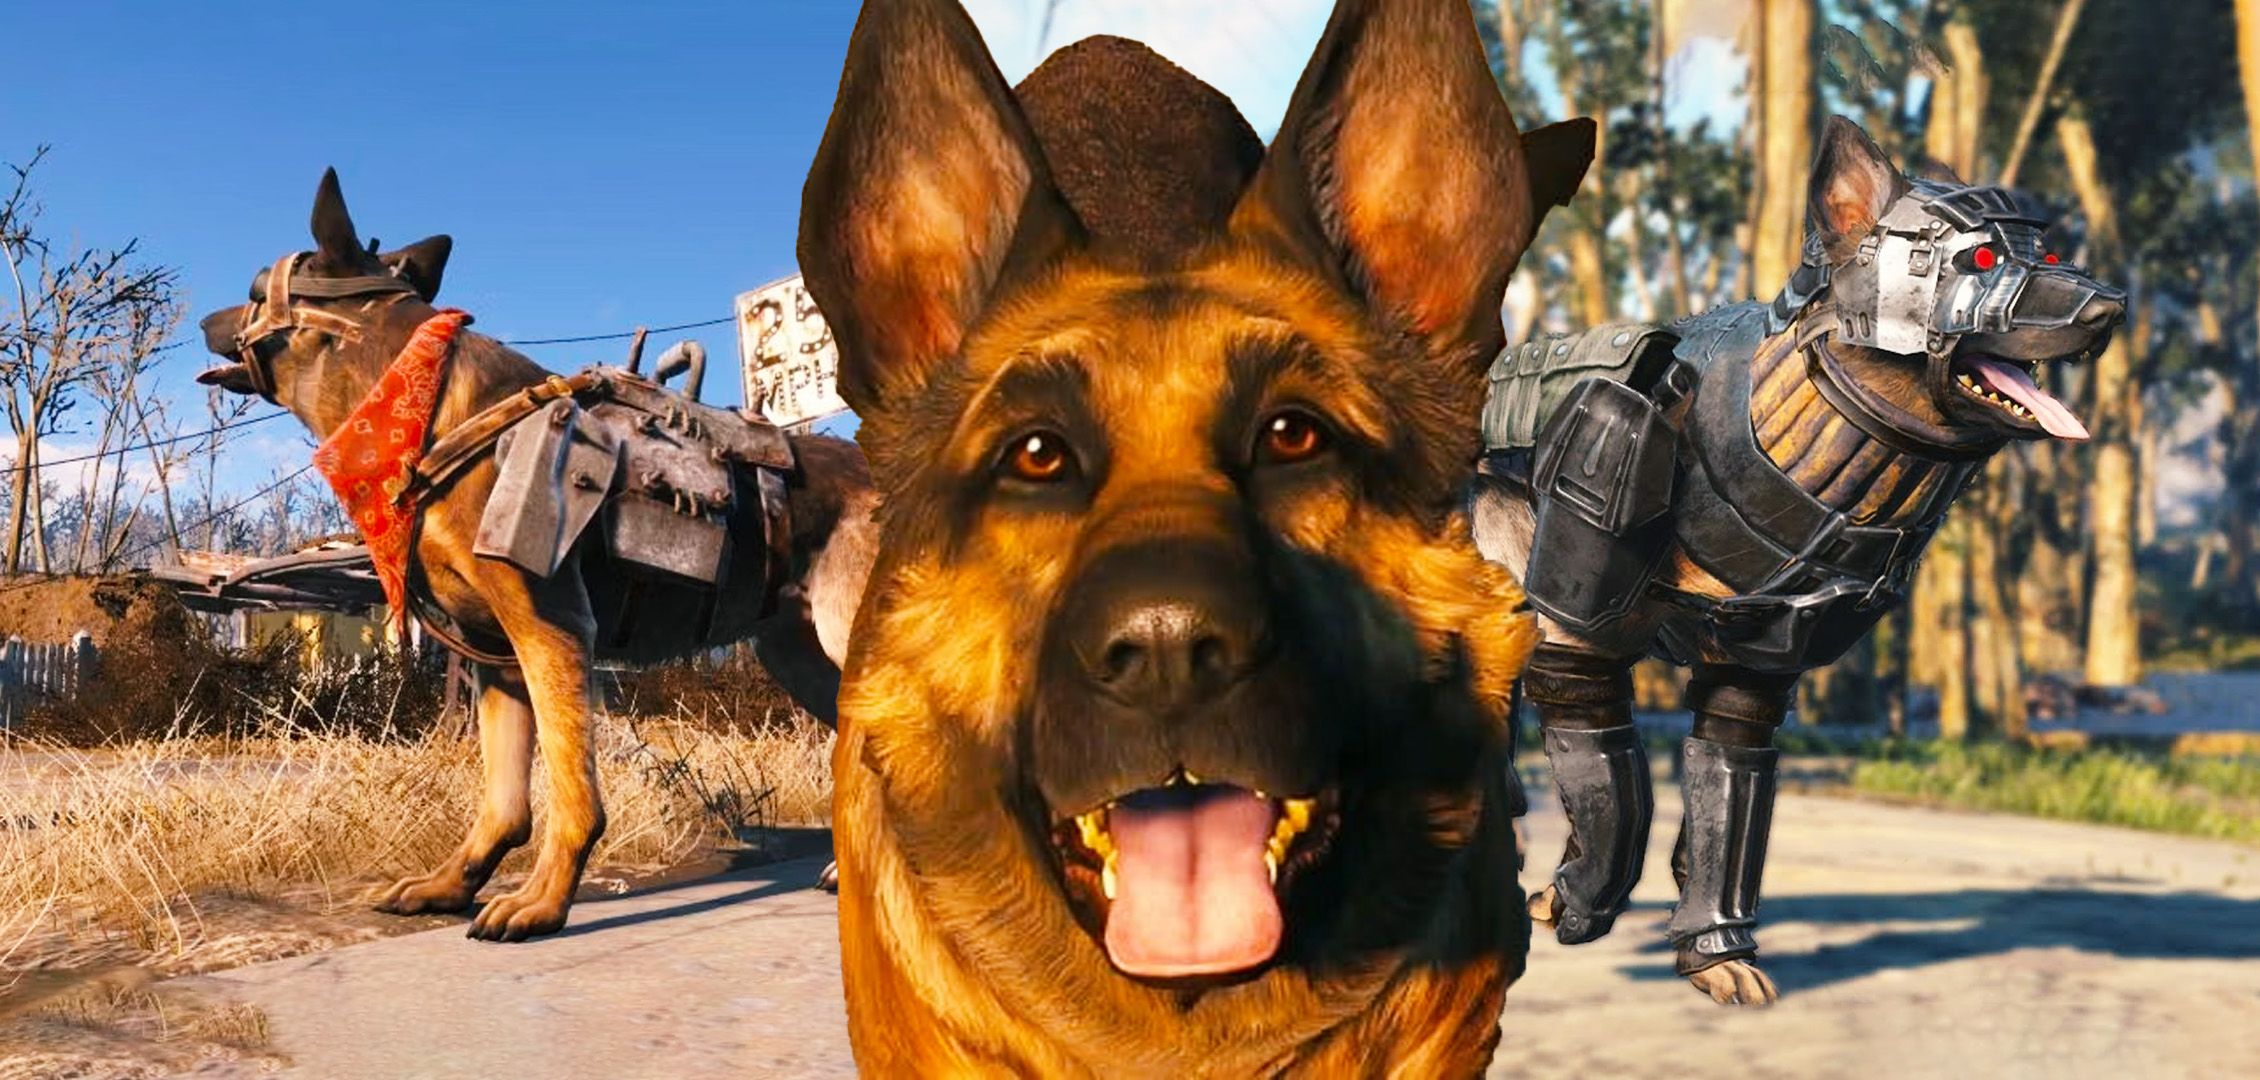 Dogmeat wearing dog armor in Fallout 4.